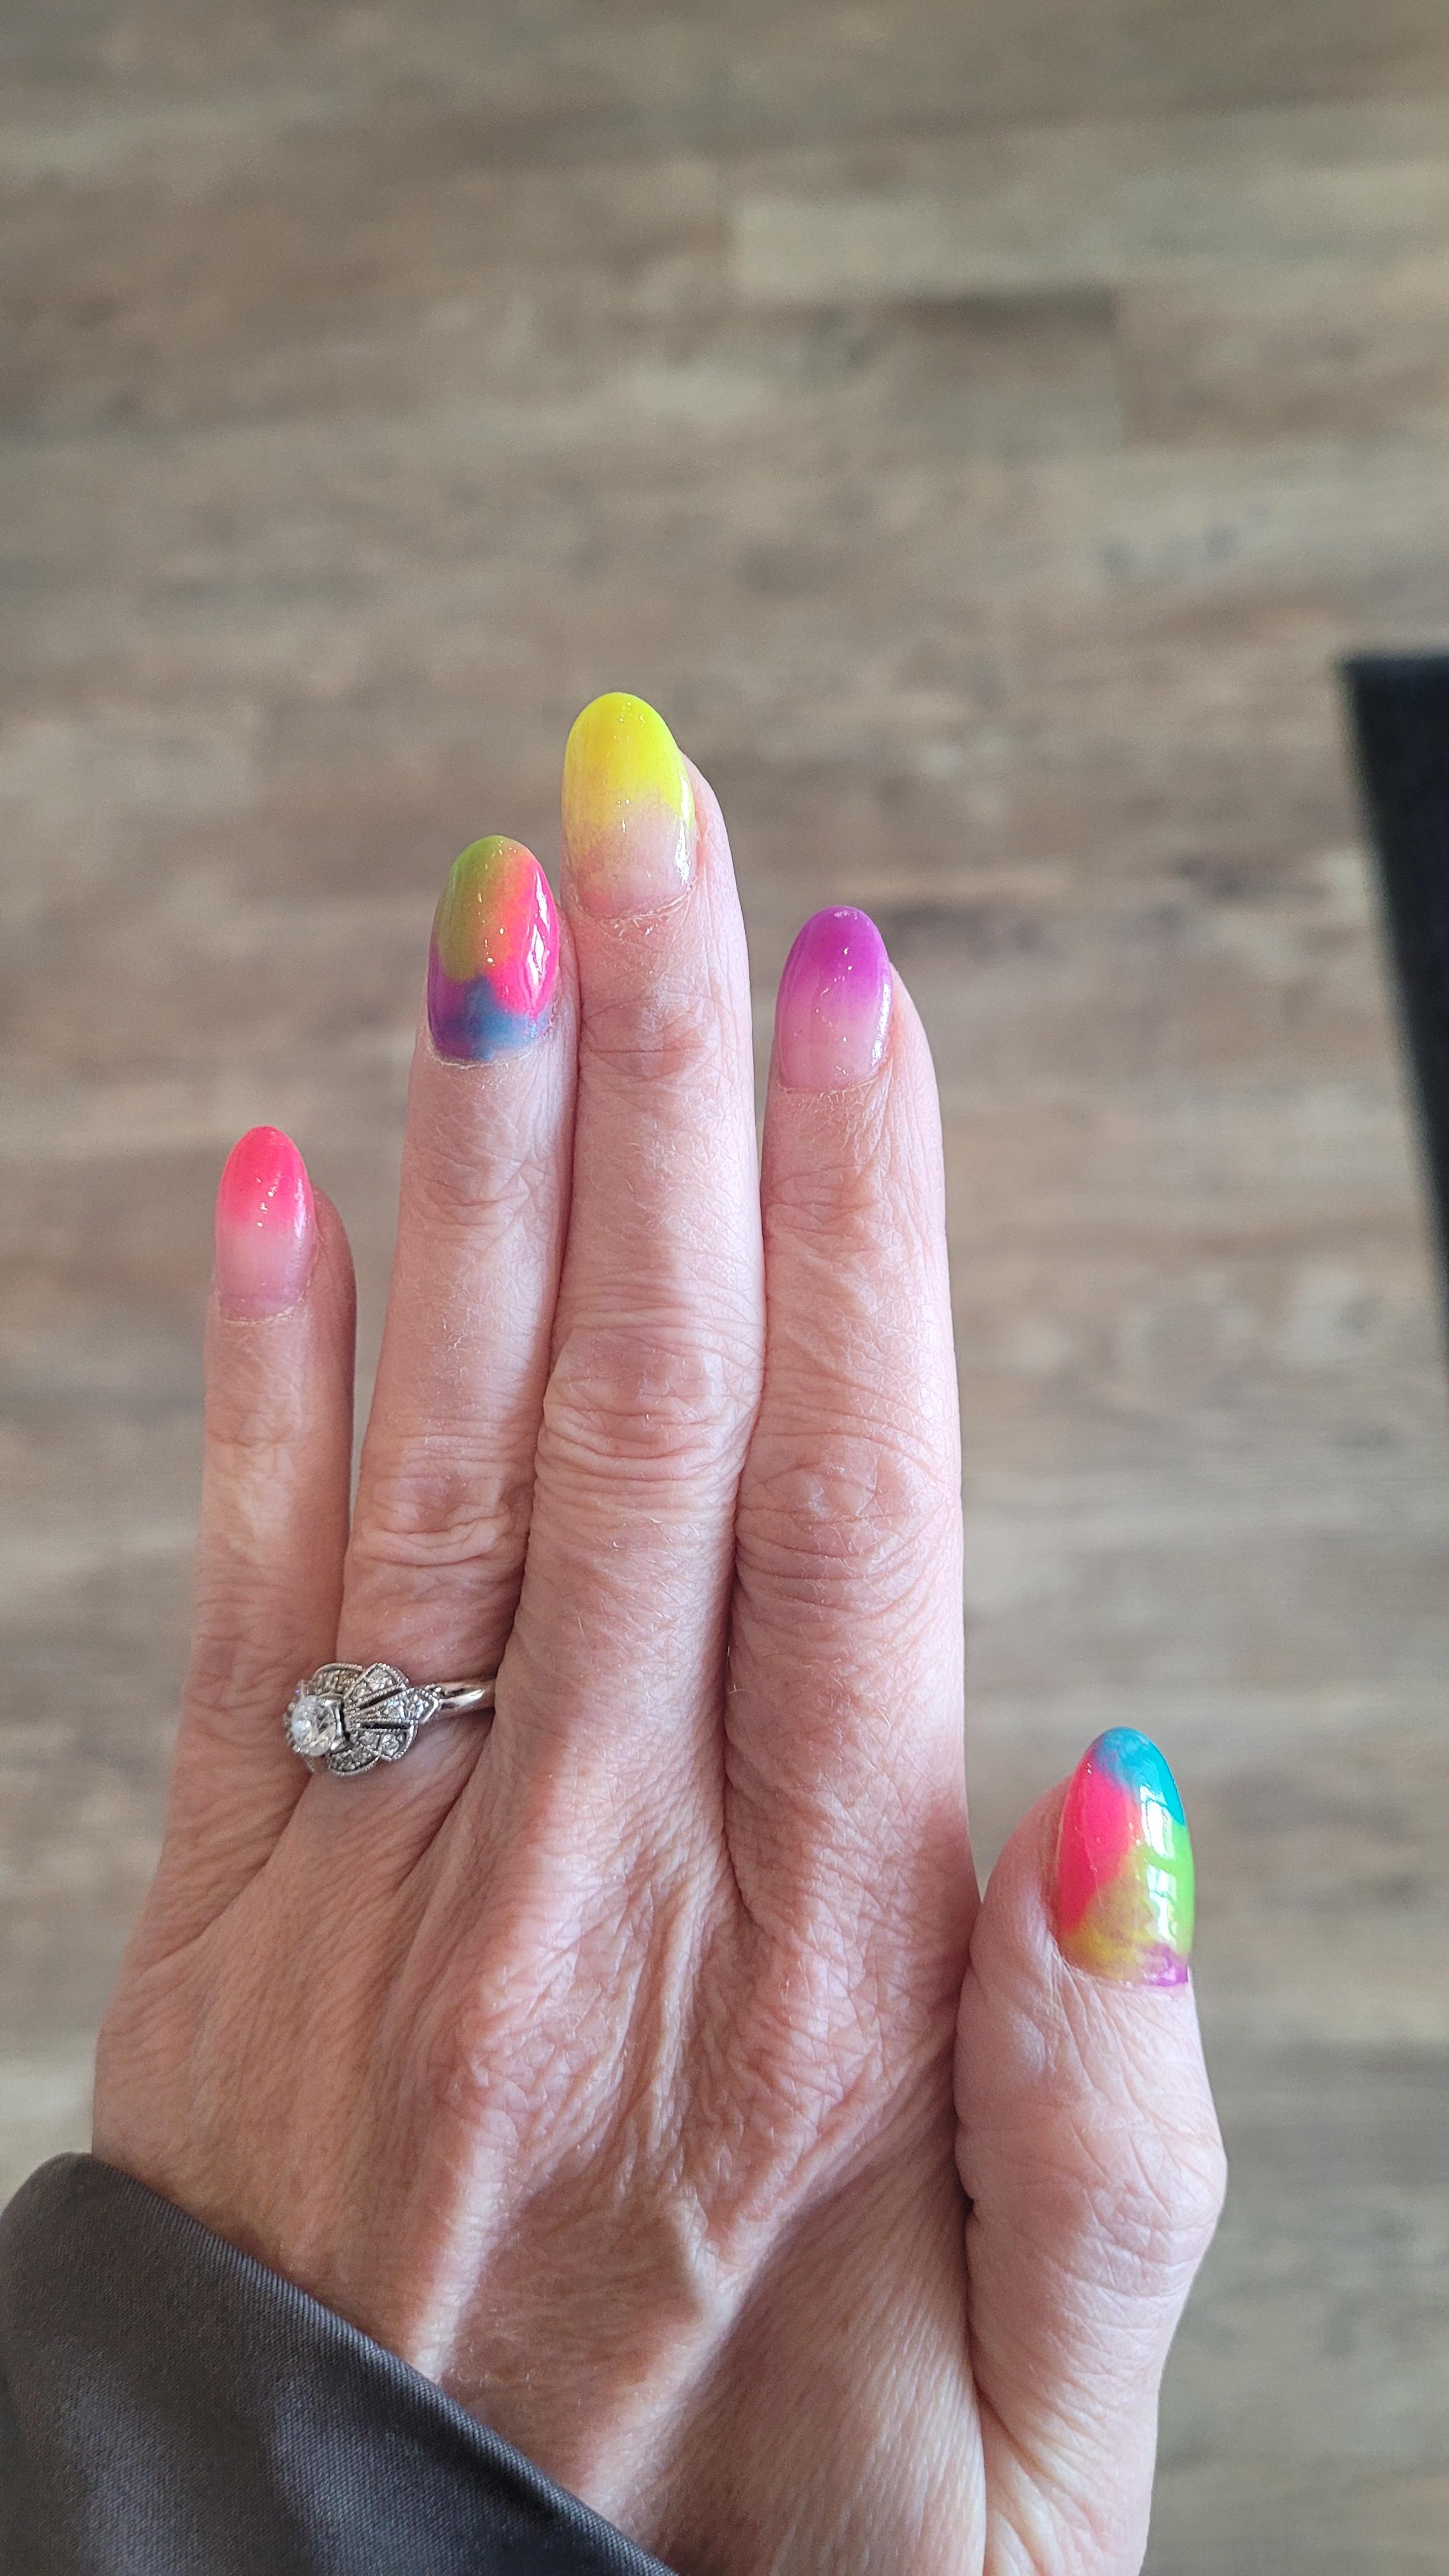 Aly's Nails In Coon Rapids MN | Vagaro